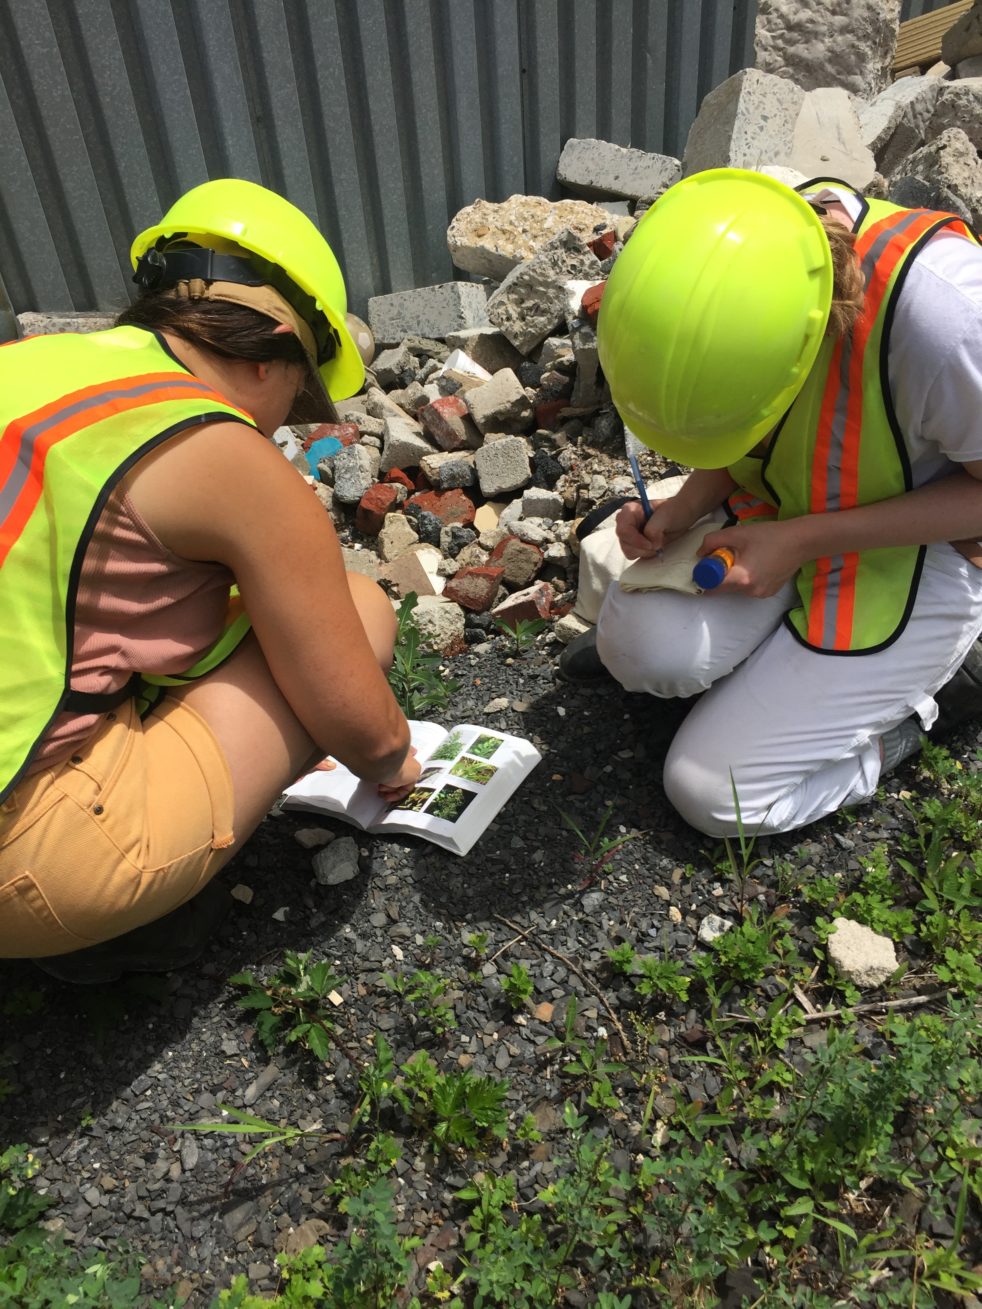 Two people in hard hats, leaning over a pile of rubble with some plants poking through, taking notes.